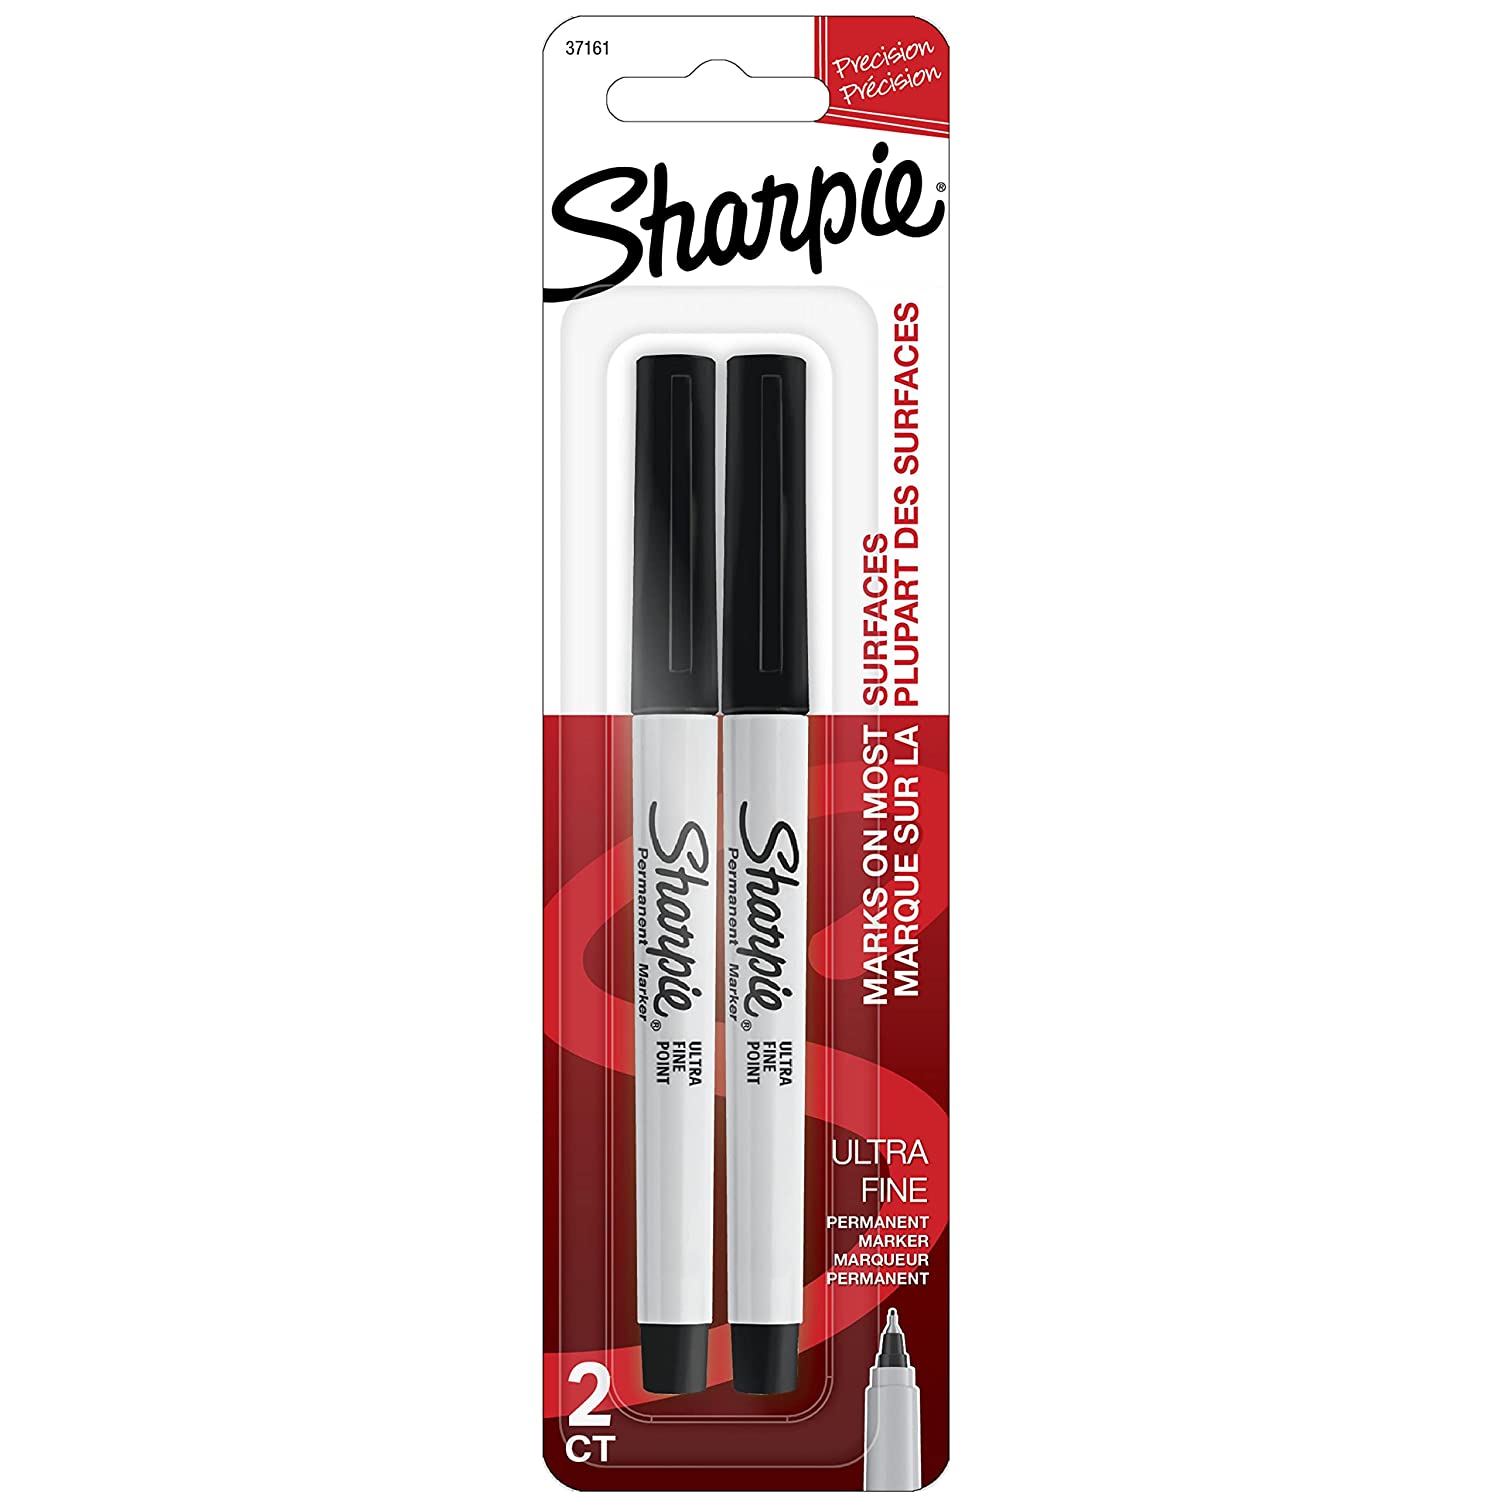 Sharpie Ultra Fine Point Permanent Markers, Black Ink, Resists Fading and Water (37161)